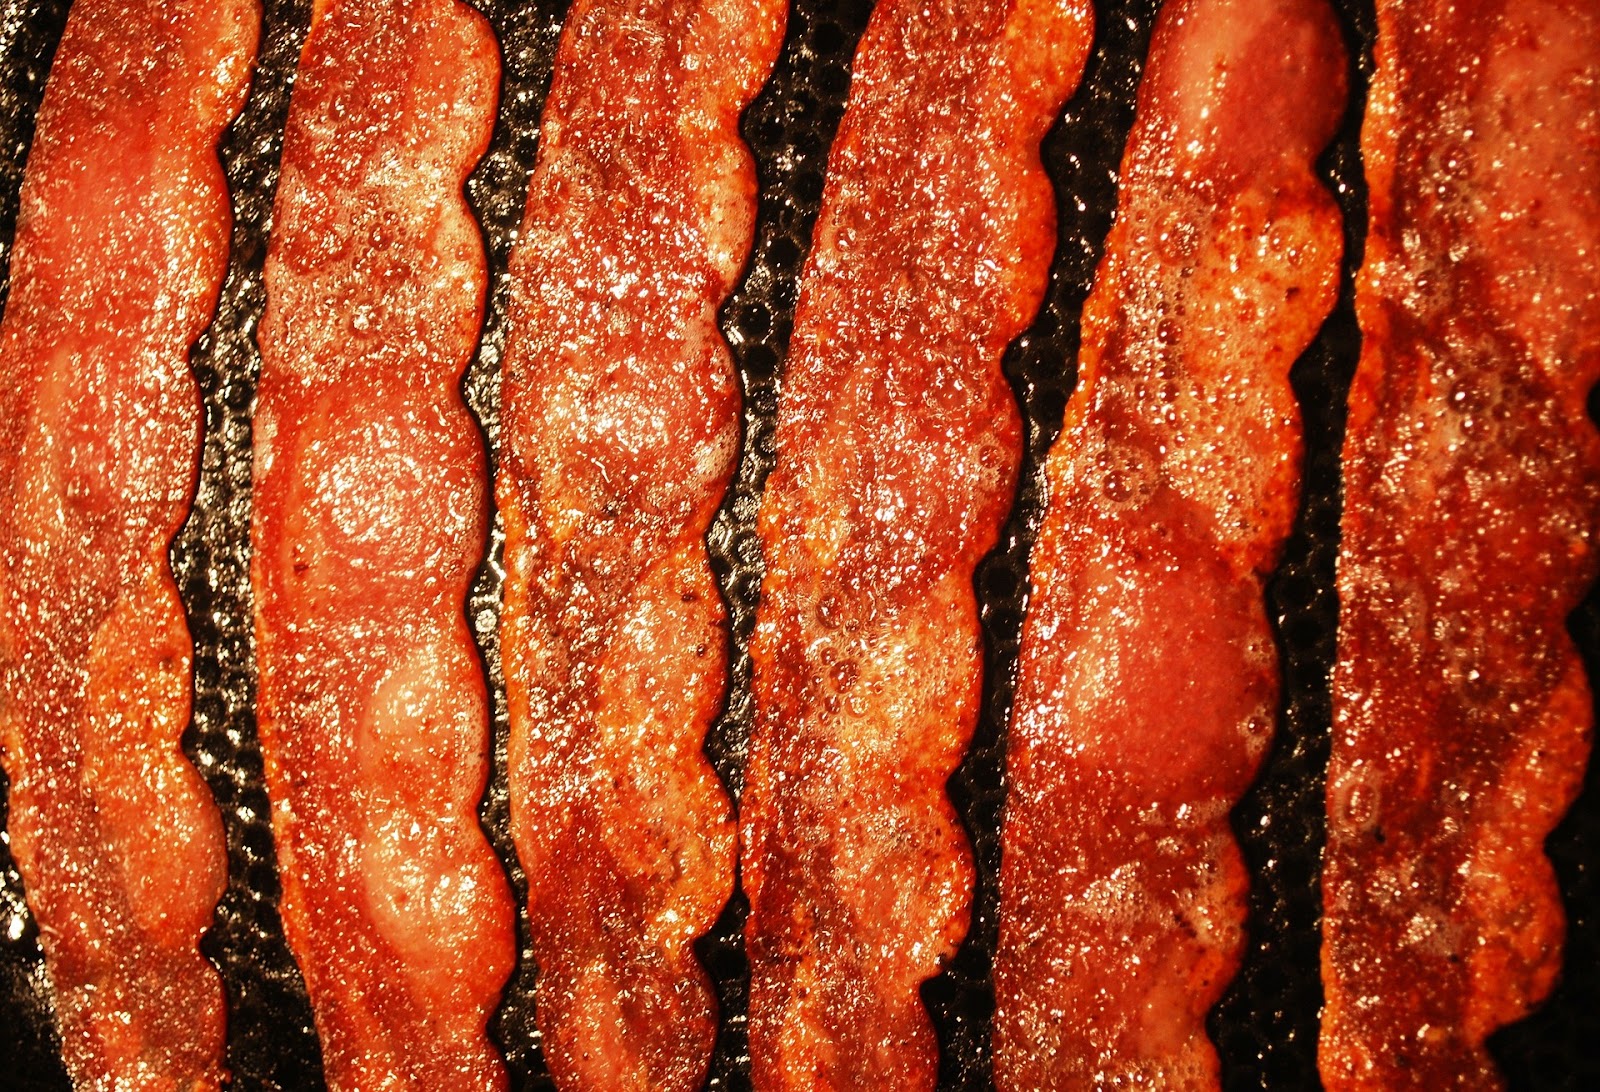 What Bacon Can Acid Reflux Sufferers Have?